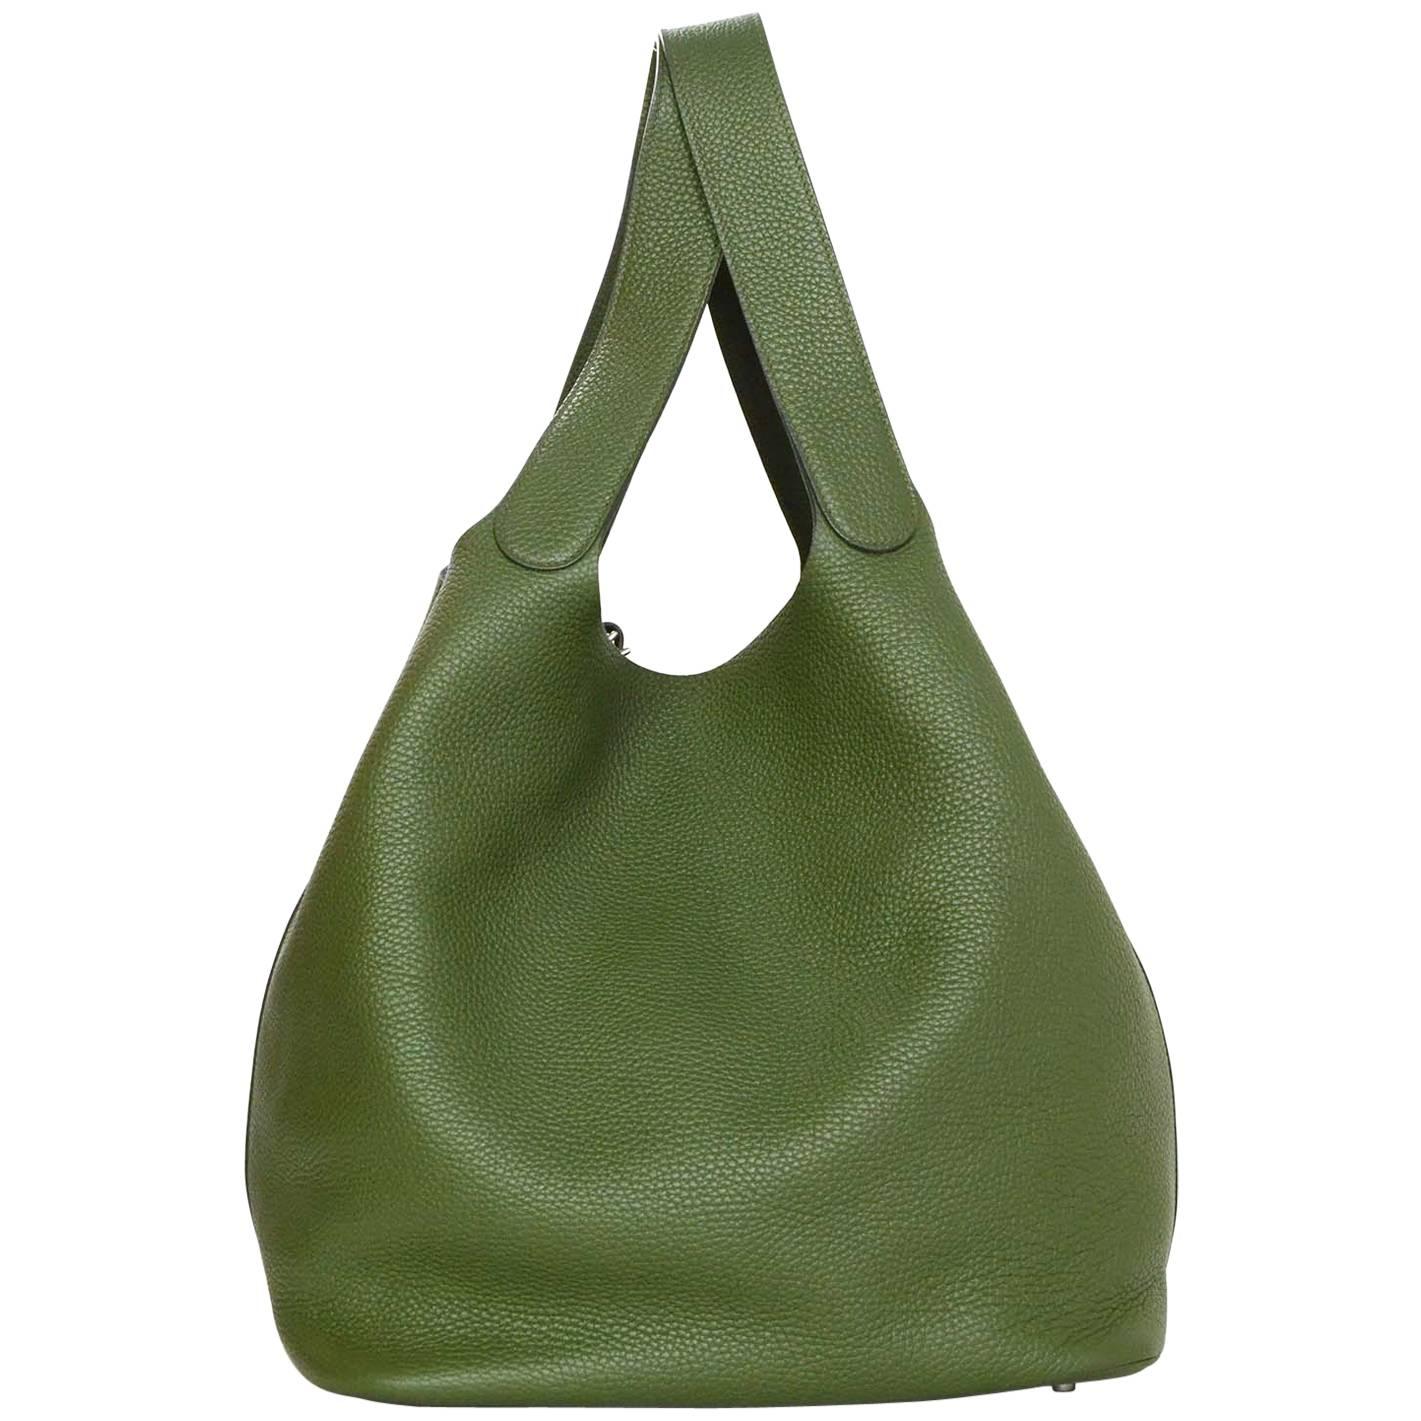 Hermes Olive Green Clemence Leather XL Picotin Lock TGM Bag PHW rt. $3, 675